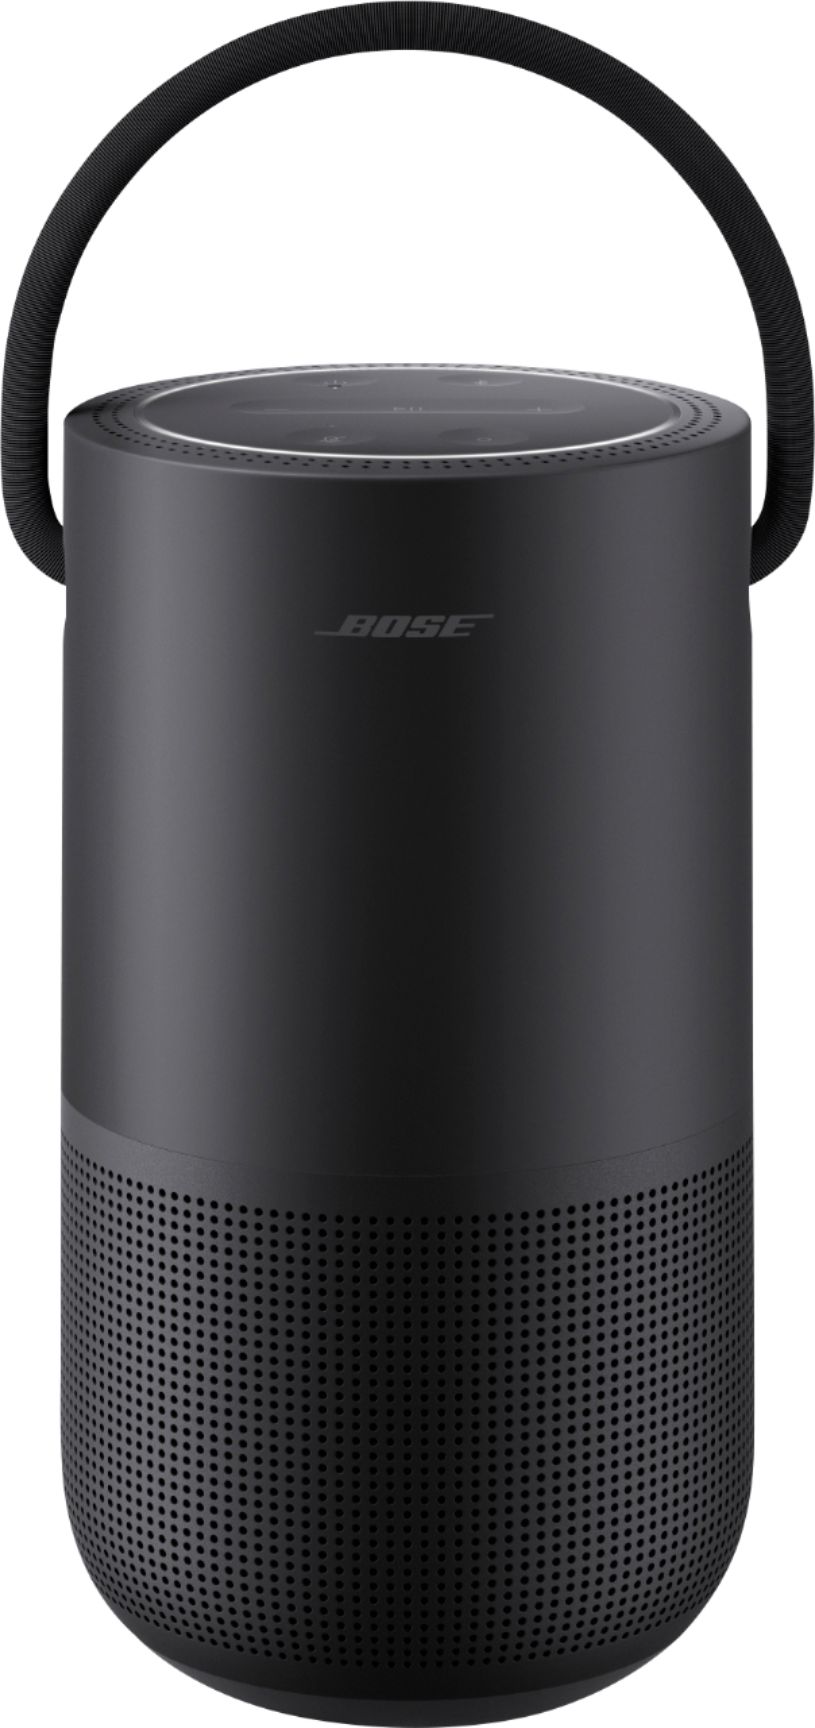 Sleutel haspel Distributie Bose Portable Smart Speaker with built-in WiFi, Bluetooth, Google Assistant  and Alexa Voice Control Triple Black 829393-1100 - Best Buy